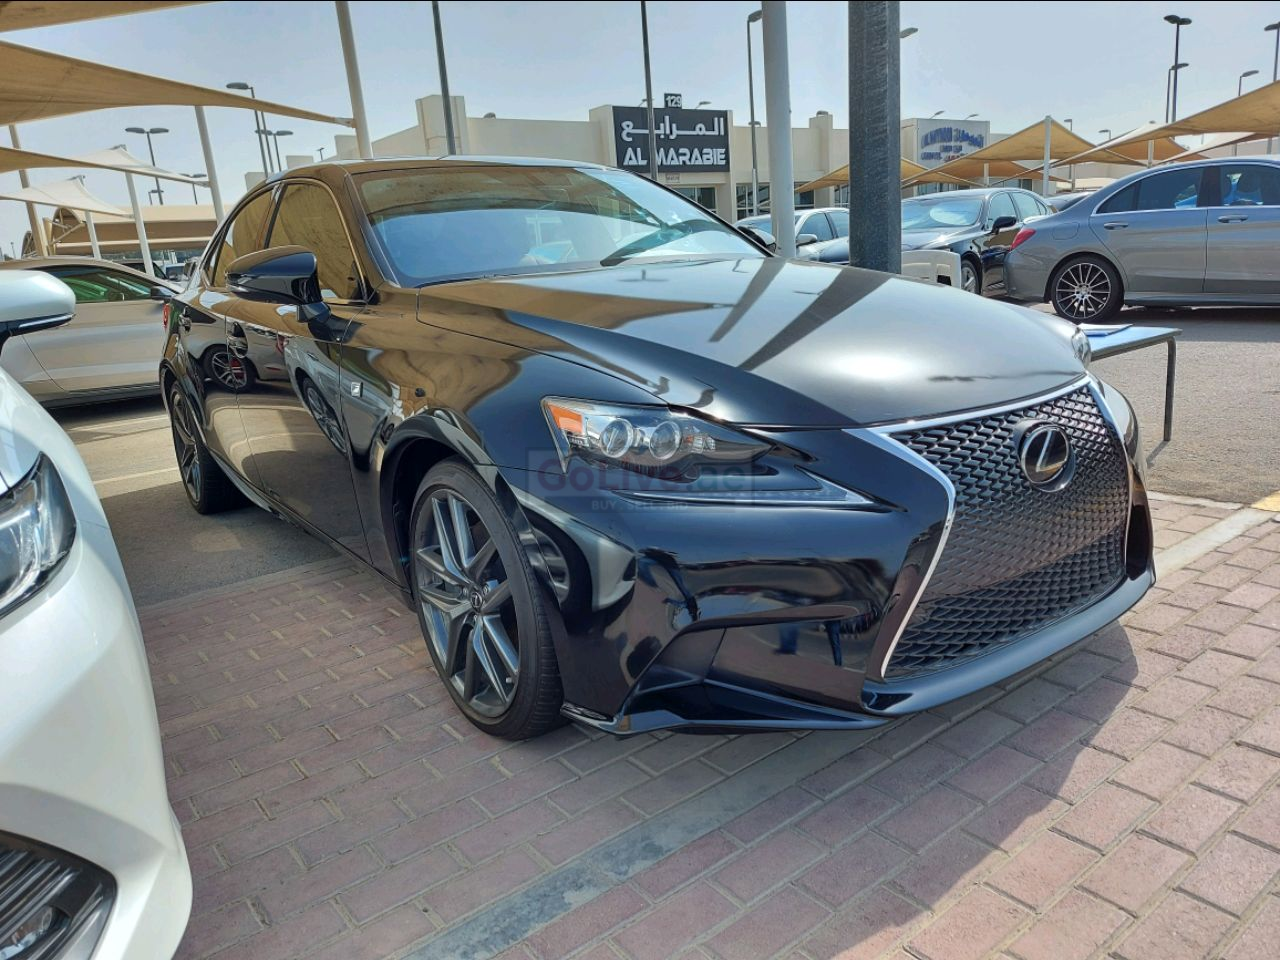 Lexus IS-C 2016 AED 78,000, Good condition, Warranty, Full Option, US Spec, Sunroof, Navigation System, Fog Lights, Negotiable